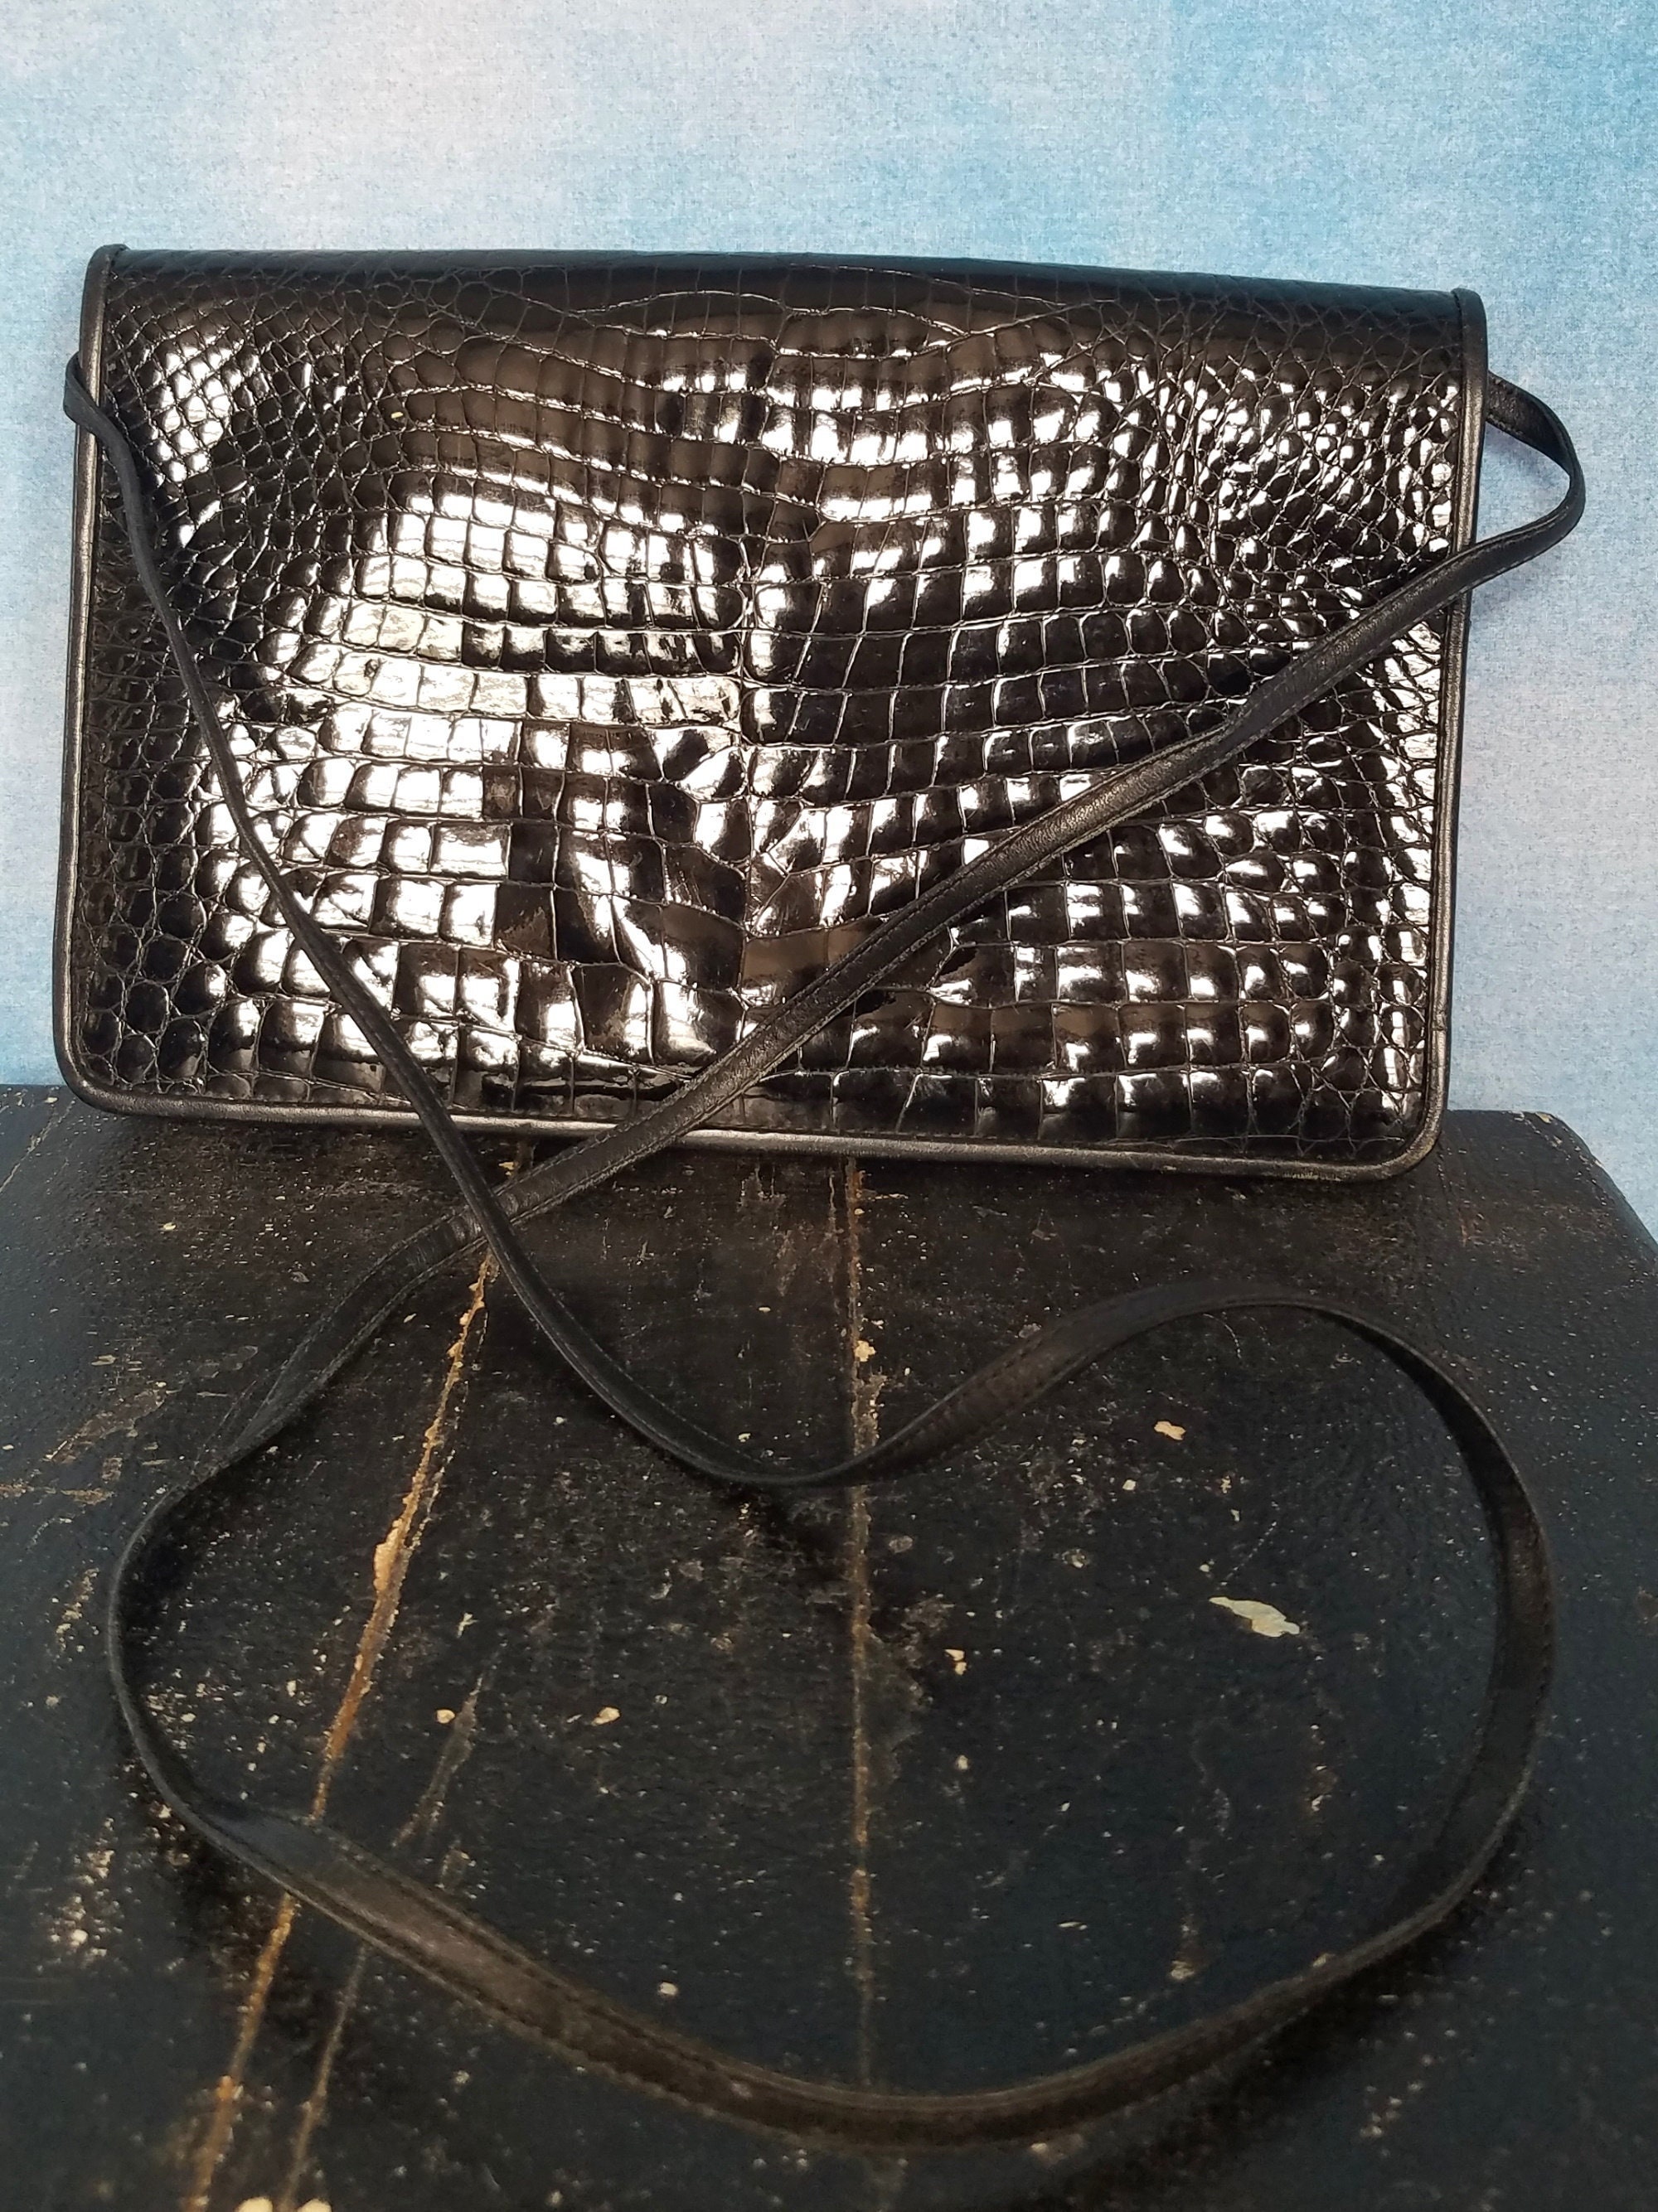 Vintage 80s Black Patent Leather Reptile Patterned Minimalist Crossbody Bag with Magnetic Clasp, Ultra Skinny Strap/ Anne Klein for Calderon